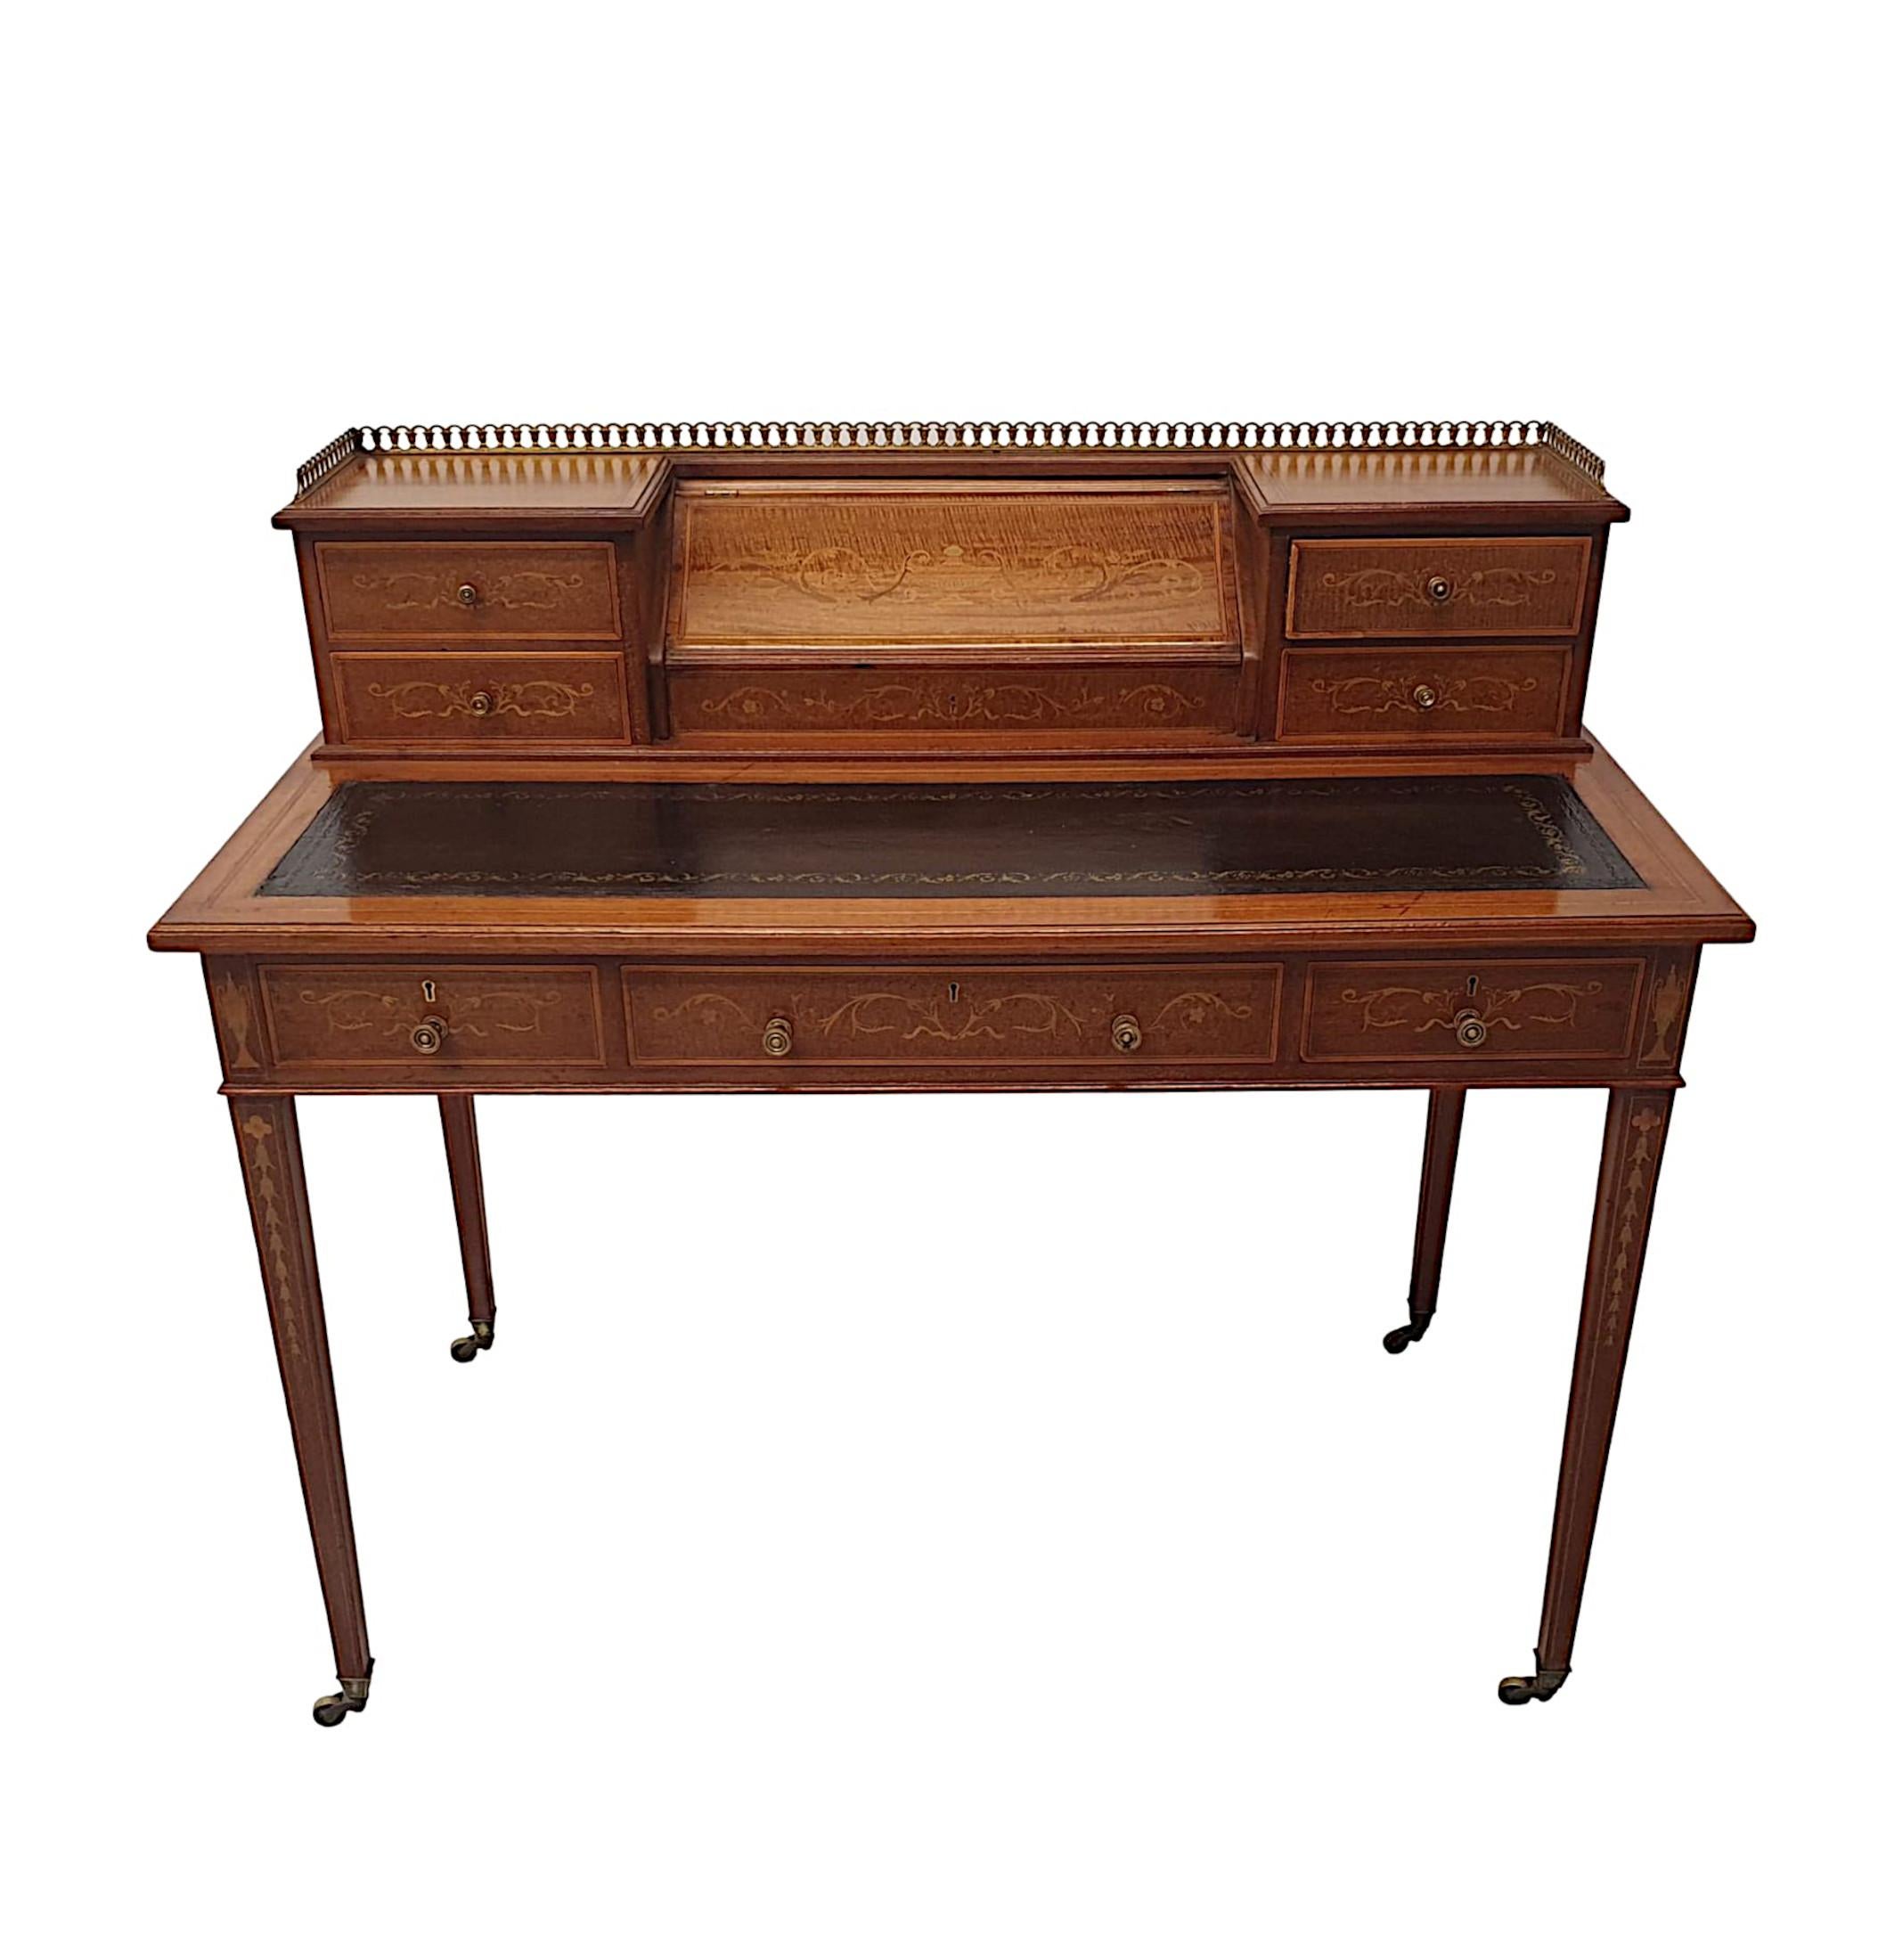 A very fine Edwardian richly patinated mahogany desk attributed to Edward and Roberts. Line inlaid throughout and with fabulous marquetry detail depicting Neoclassical motifs of urns, scrolling foliate, flowerheads and trailing bell husks. The